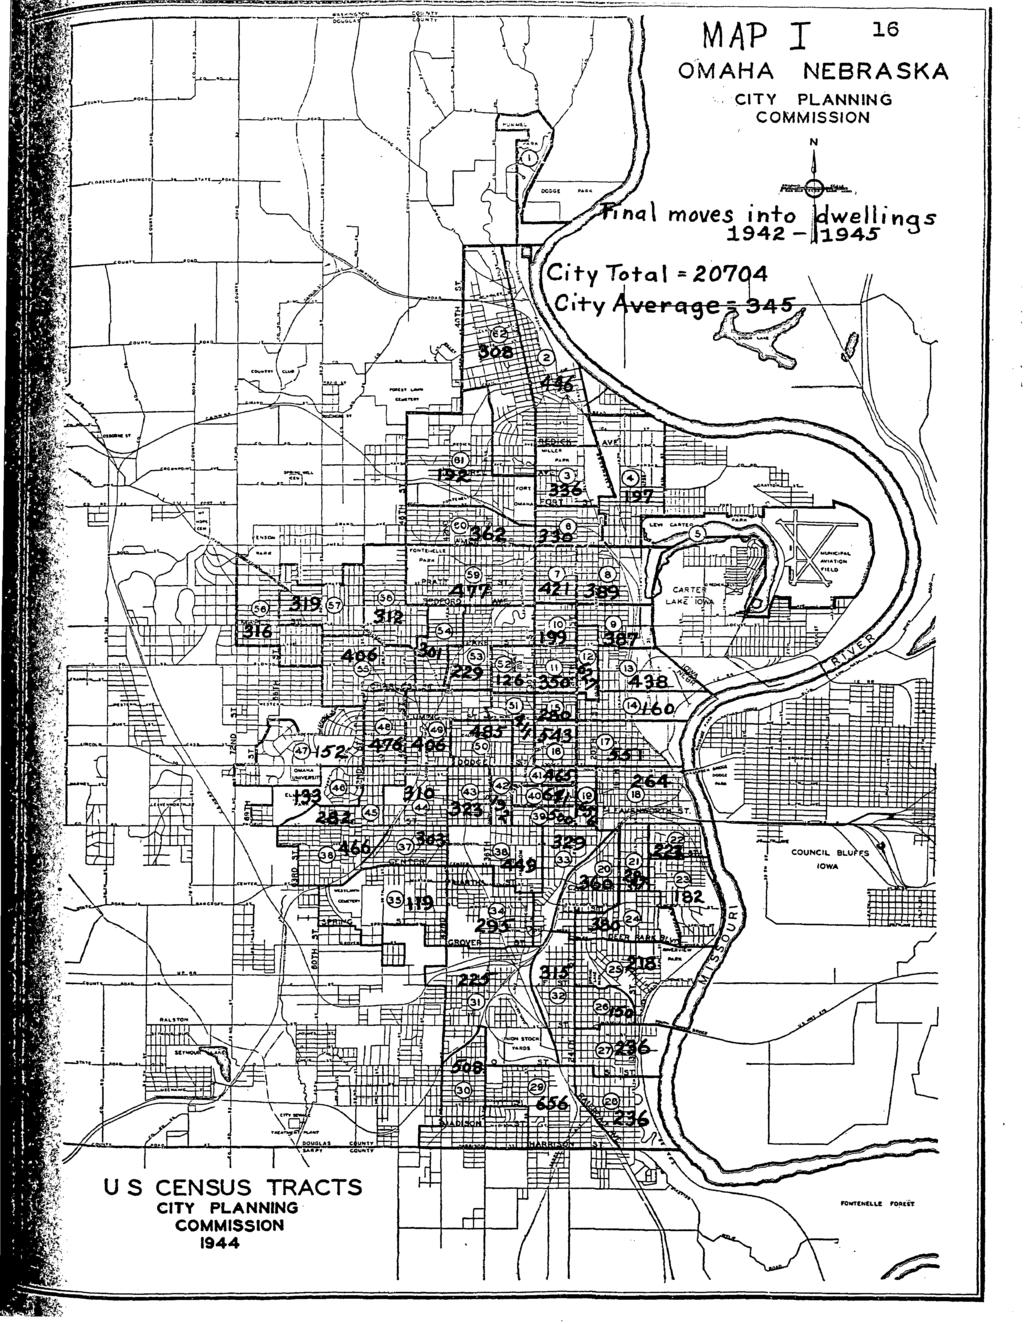 M A P I 1 6 OMAHA NEBRASKA c it y p l a n n i n g COMMISSION i City Total = 207GfA Cit-y / ave rage moves into c welli 1942